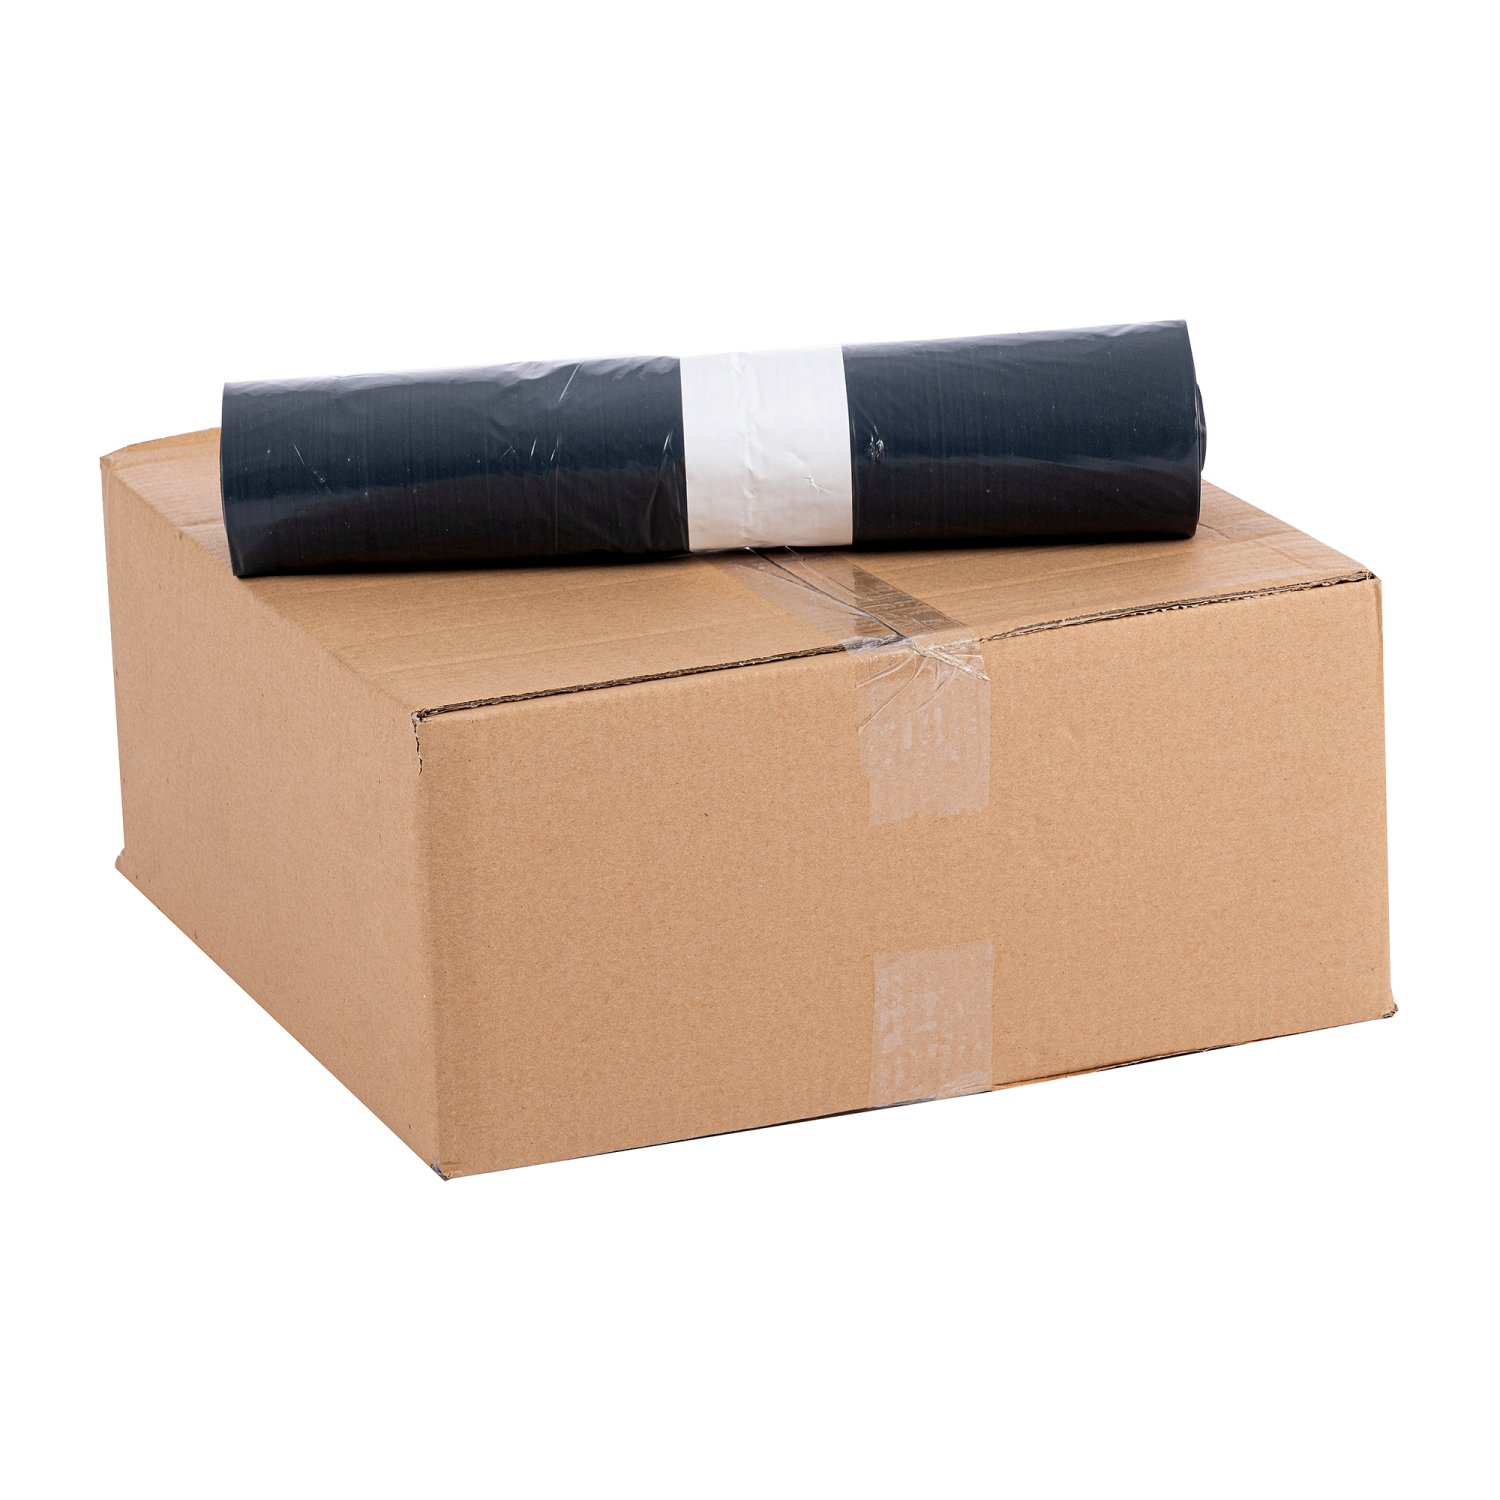 Container bag 360 l, LDPE recyclate, 40 mu, black bag, unprinted, unperforated, without closing ribbon